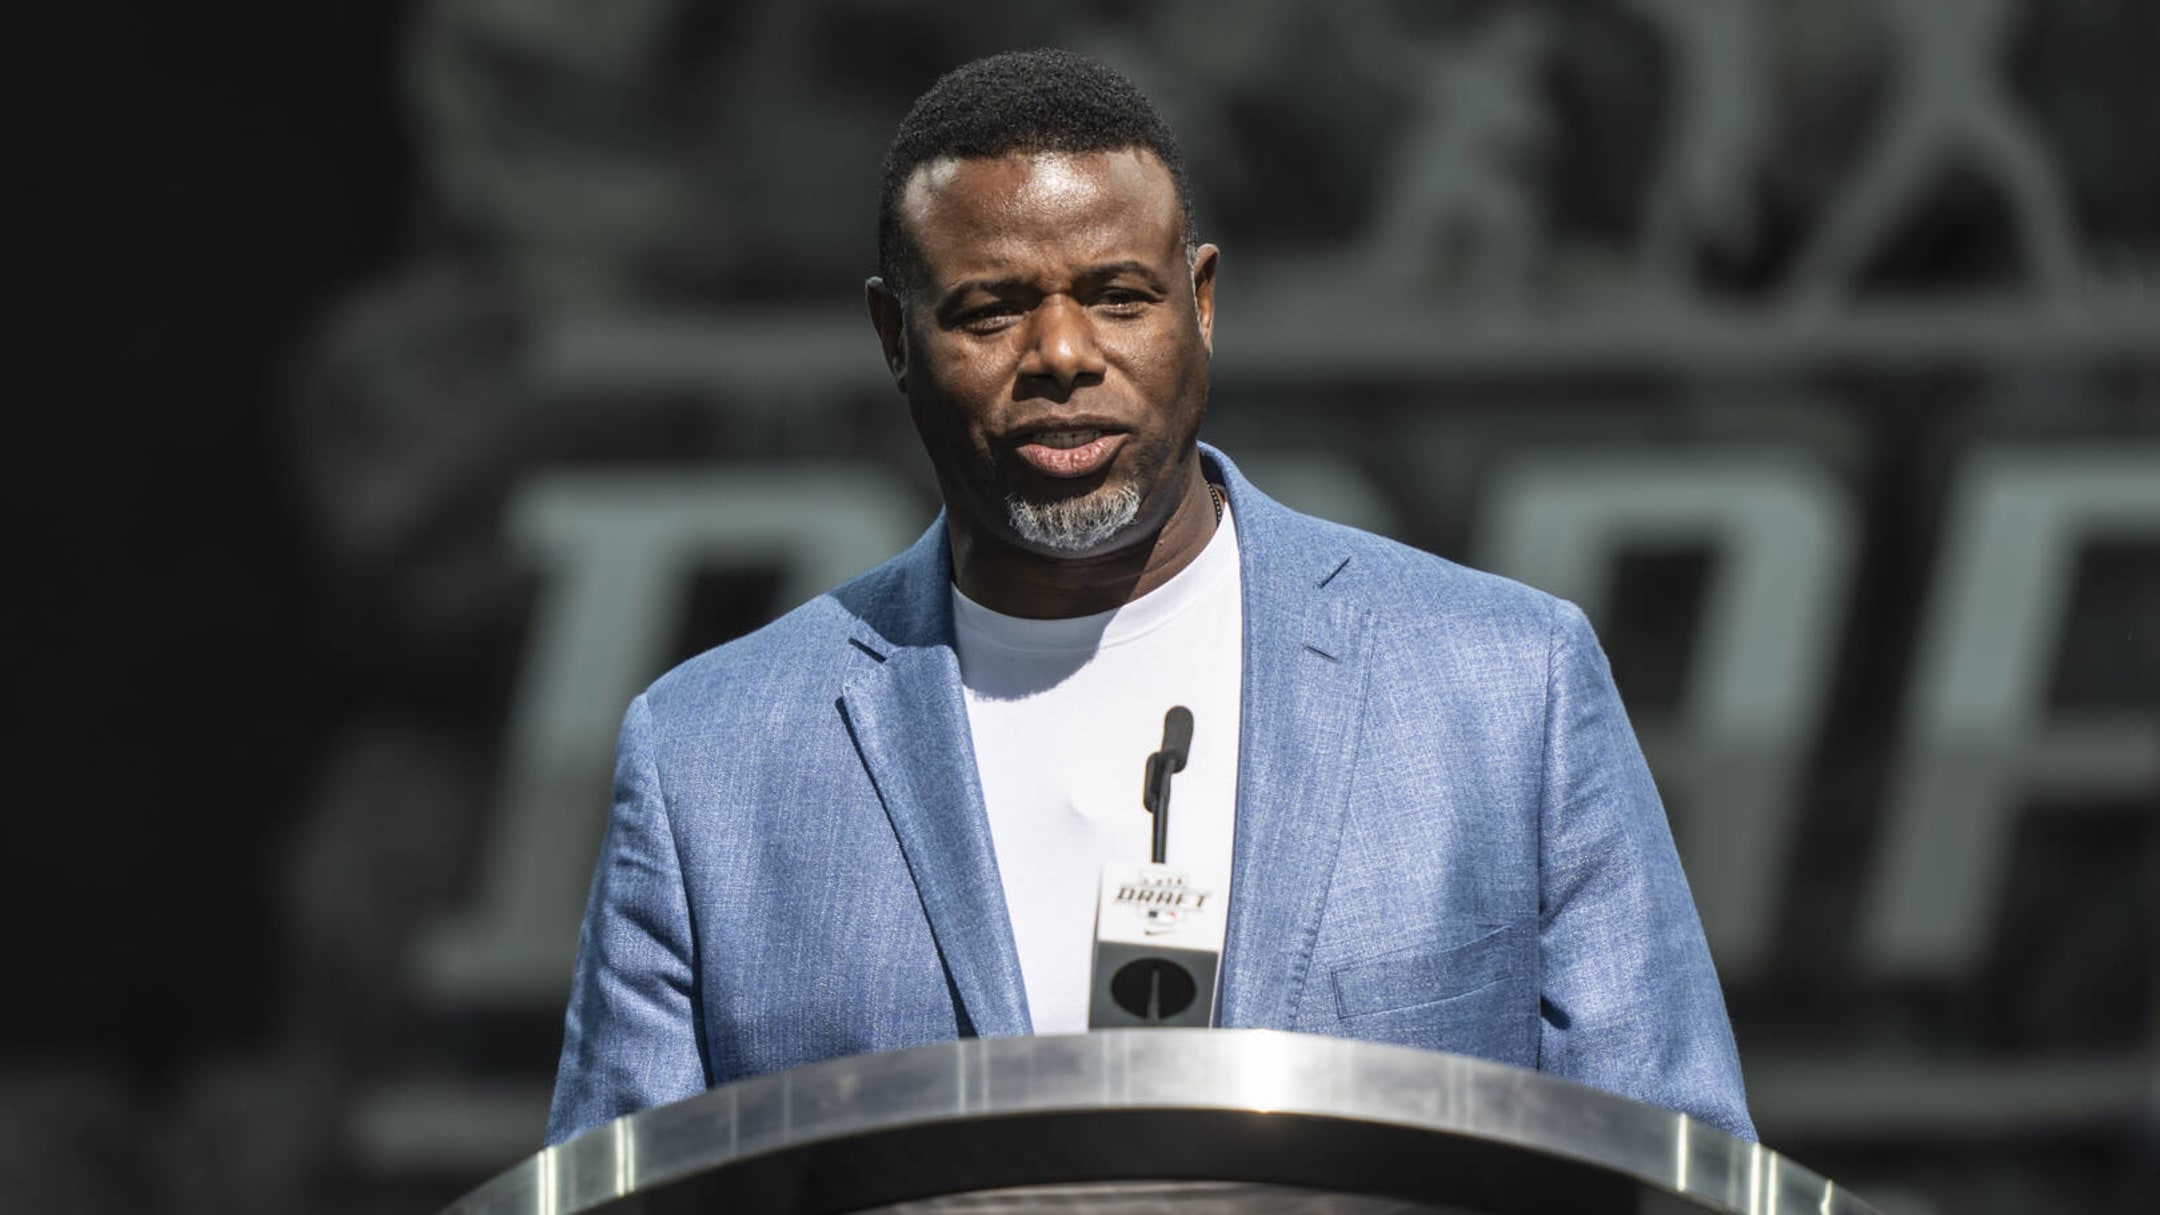 Why was Ken Griffey Jr. credentialed as media for Cowboys-Cardinals?